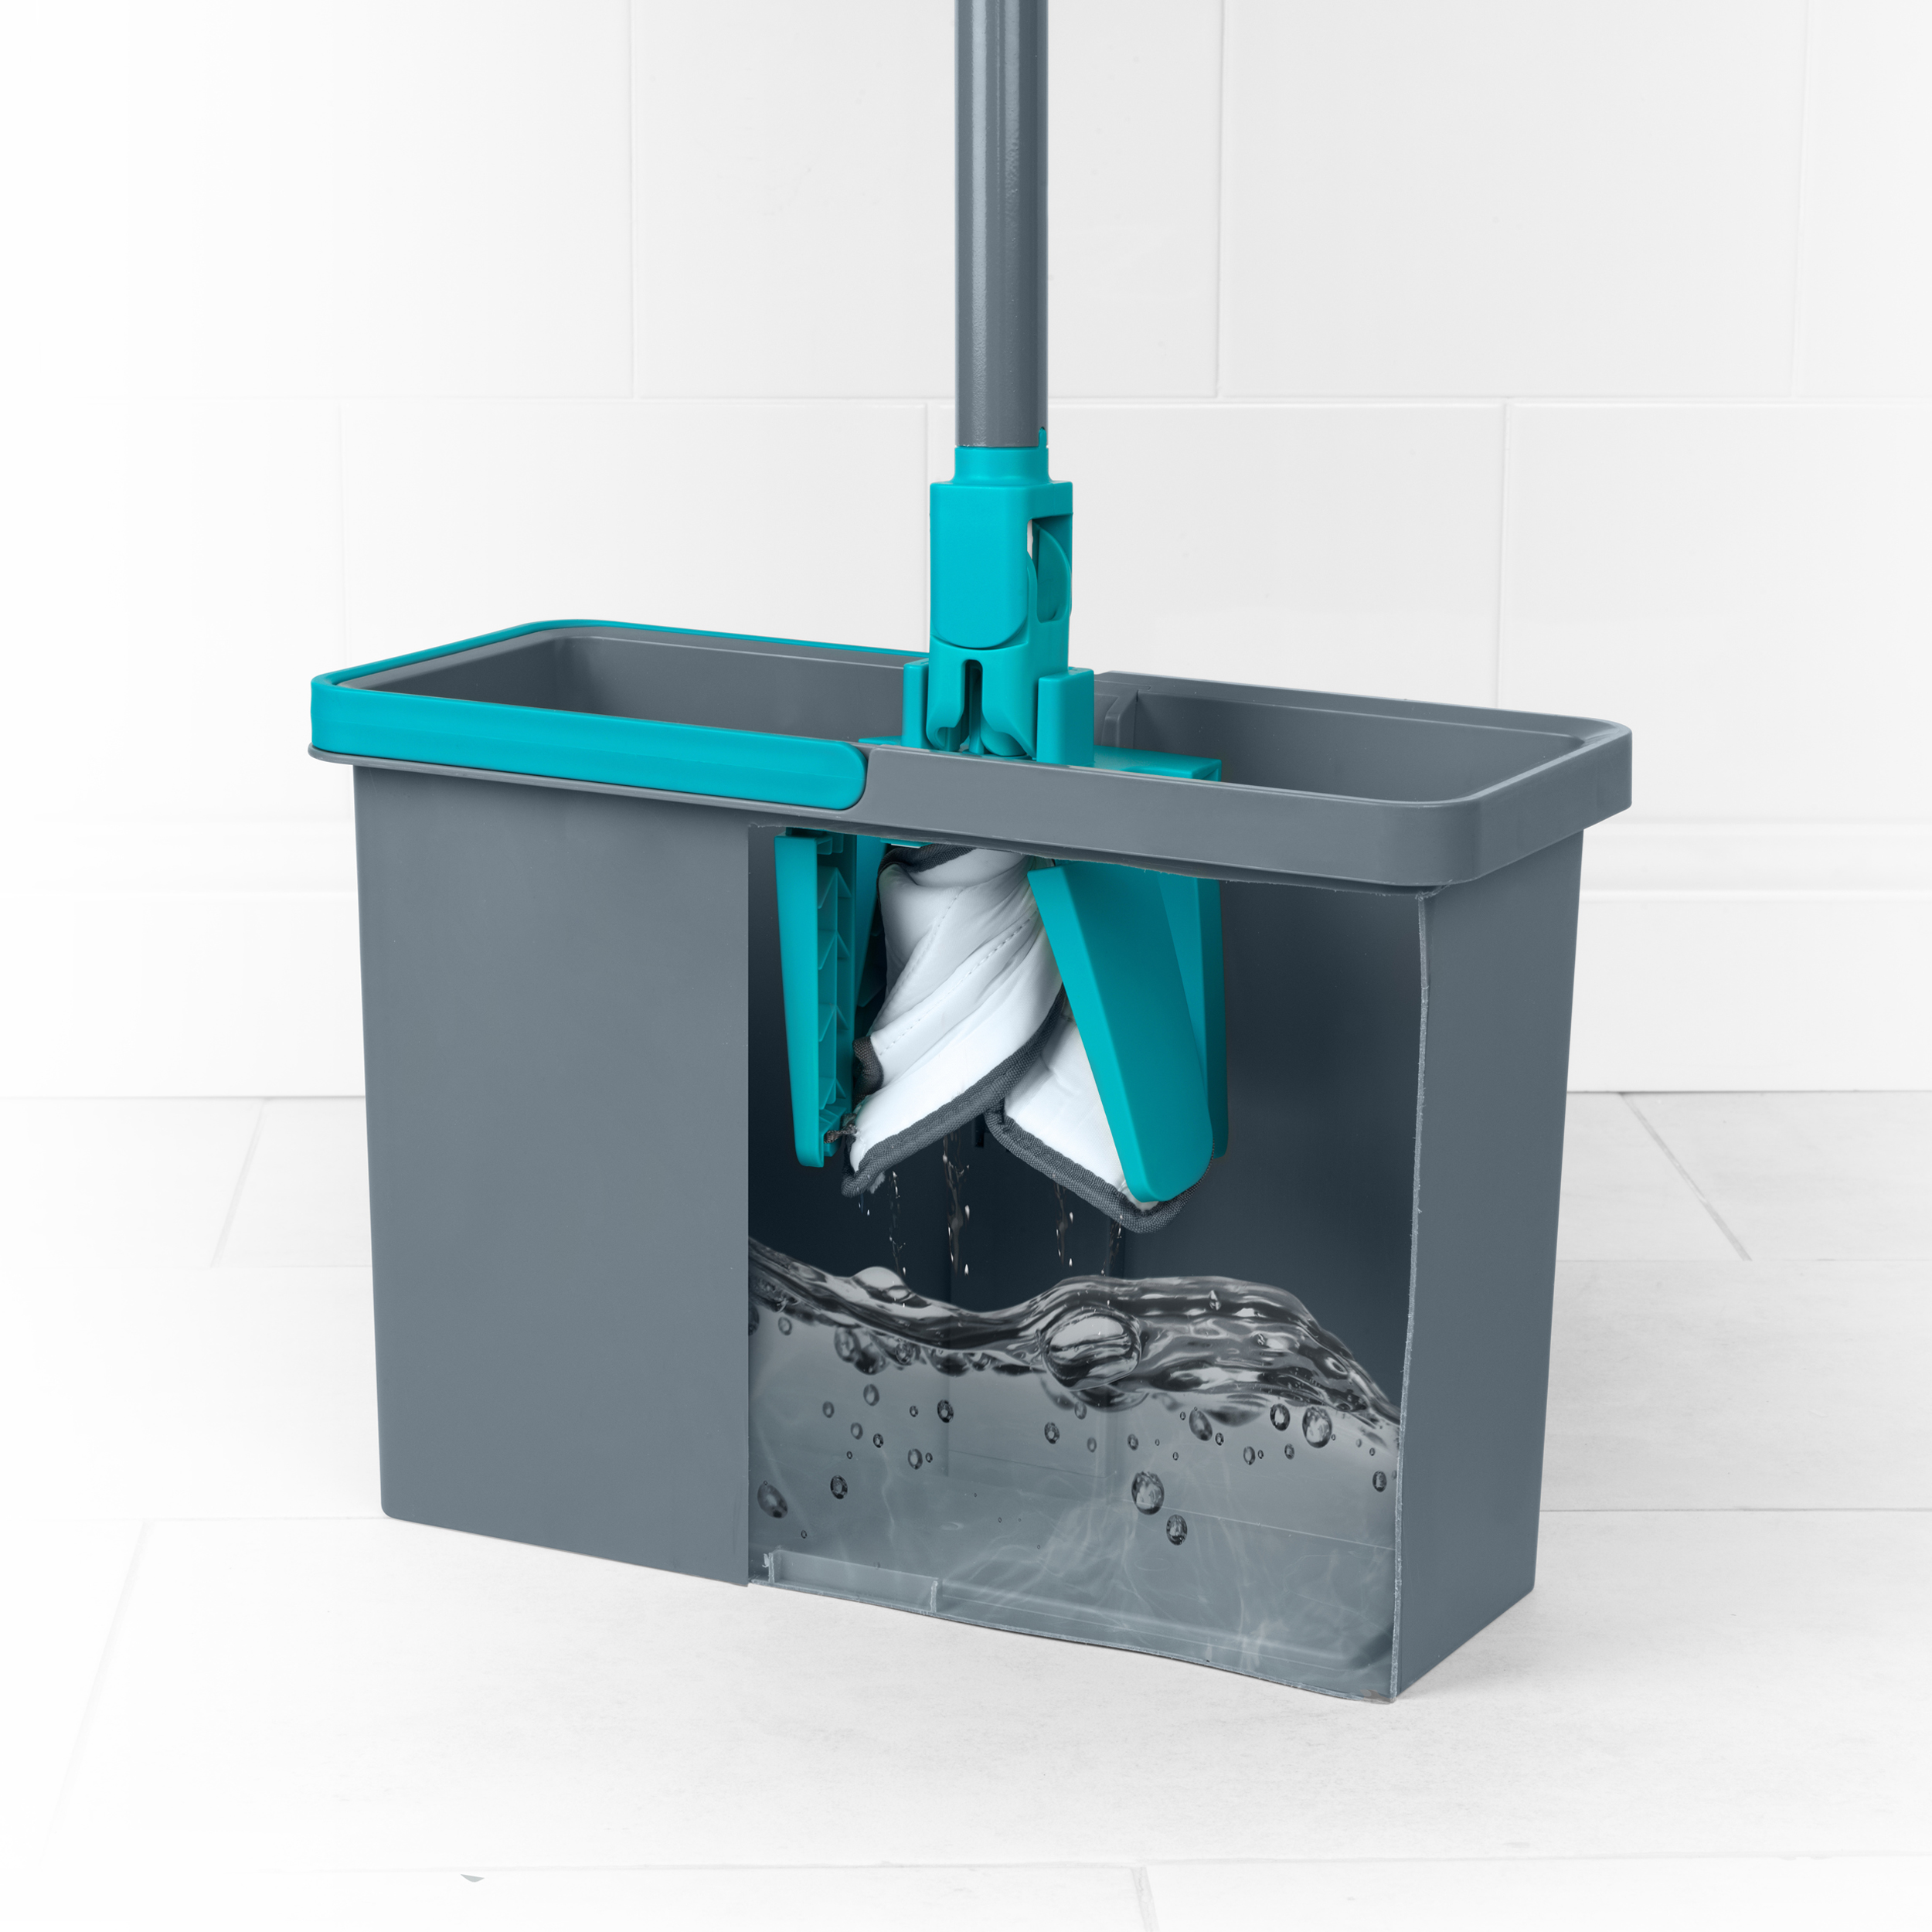 A cross section view of a Pet plus TPR mop and Bucket